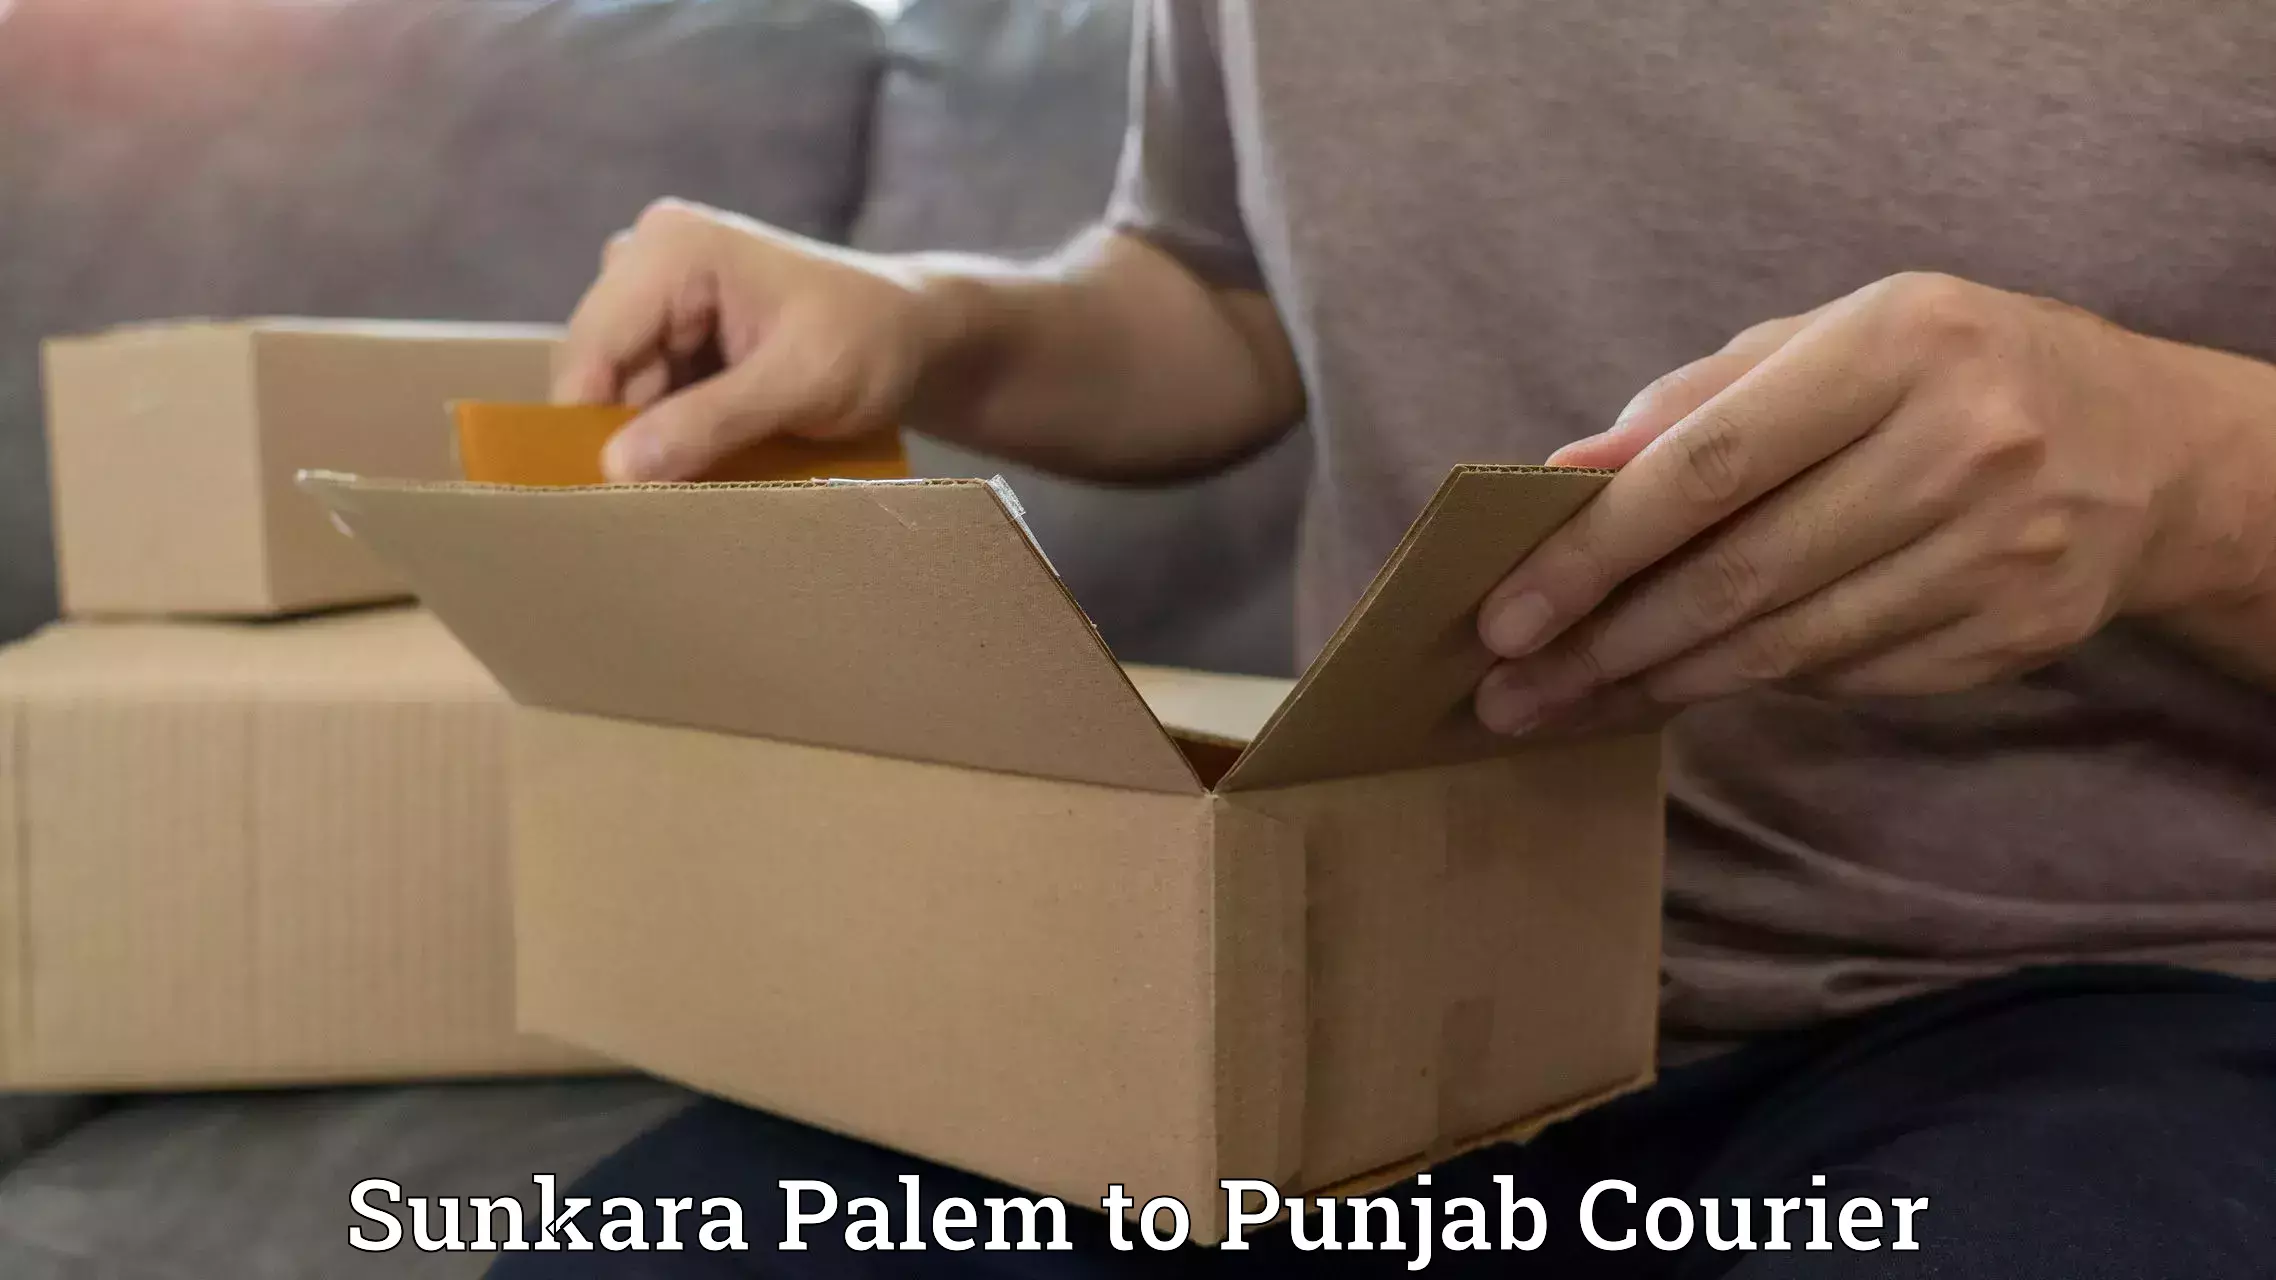 Professional courier services in Sunkara Palem to Patiala